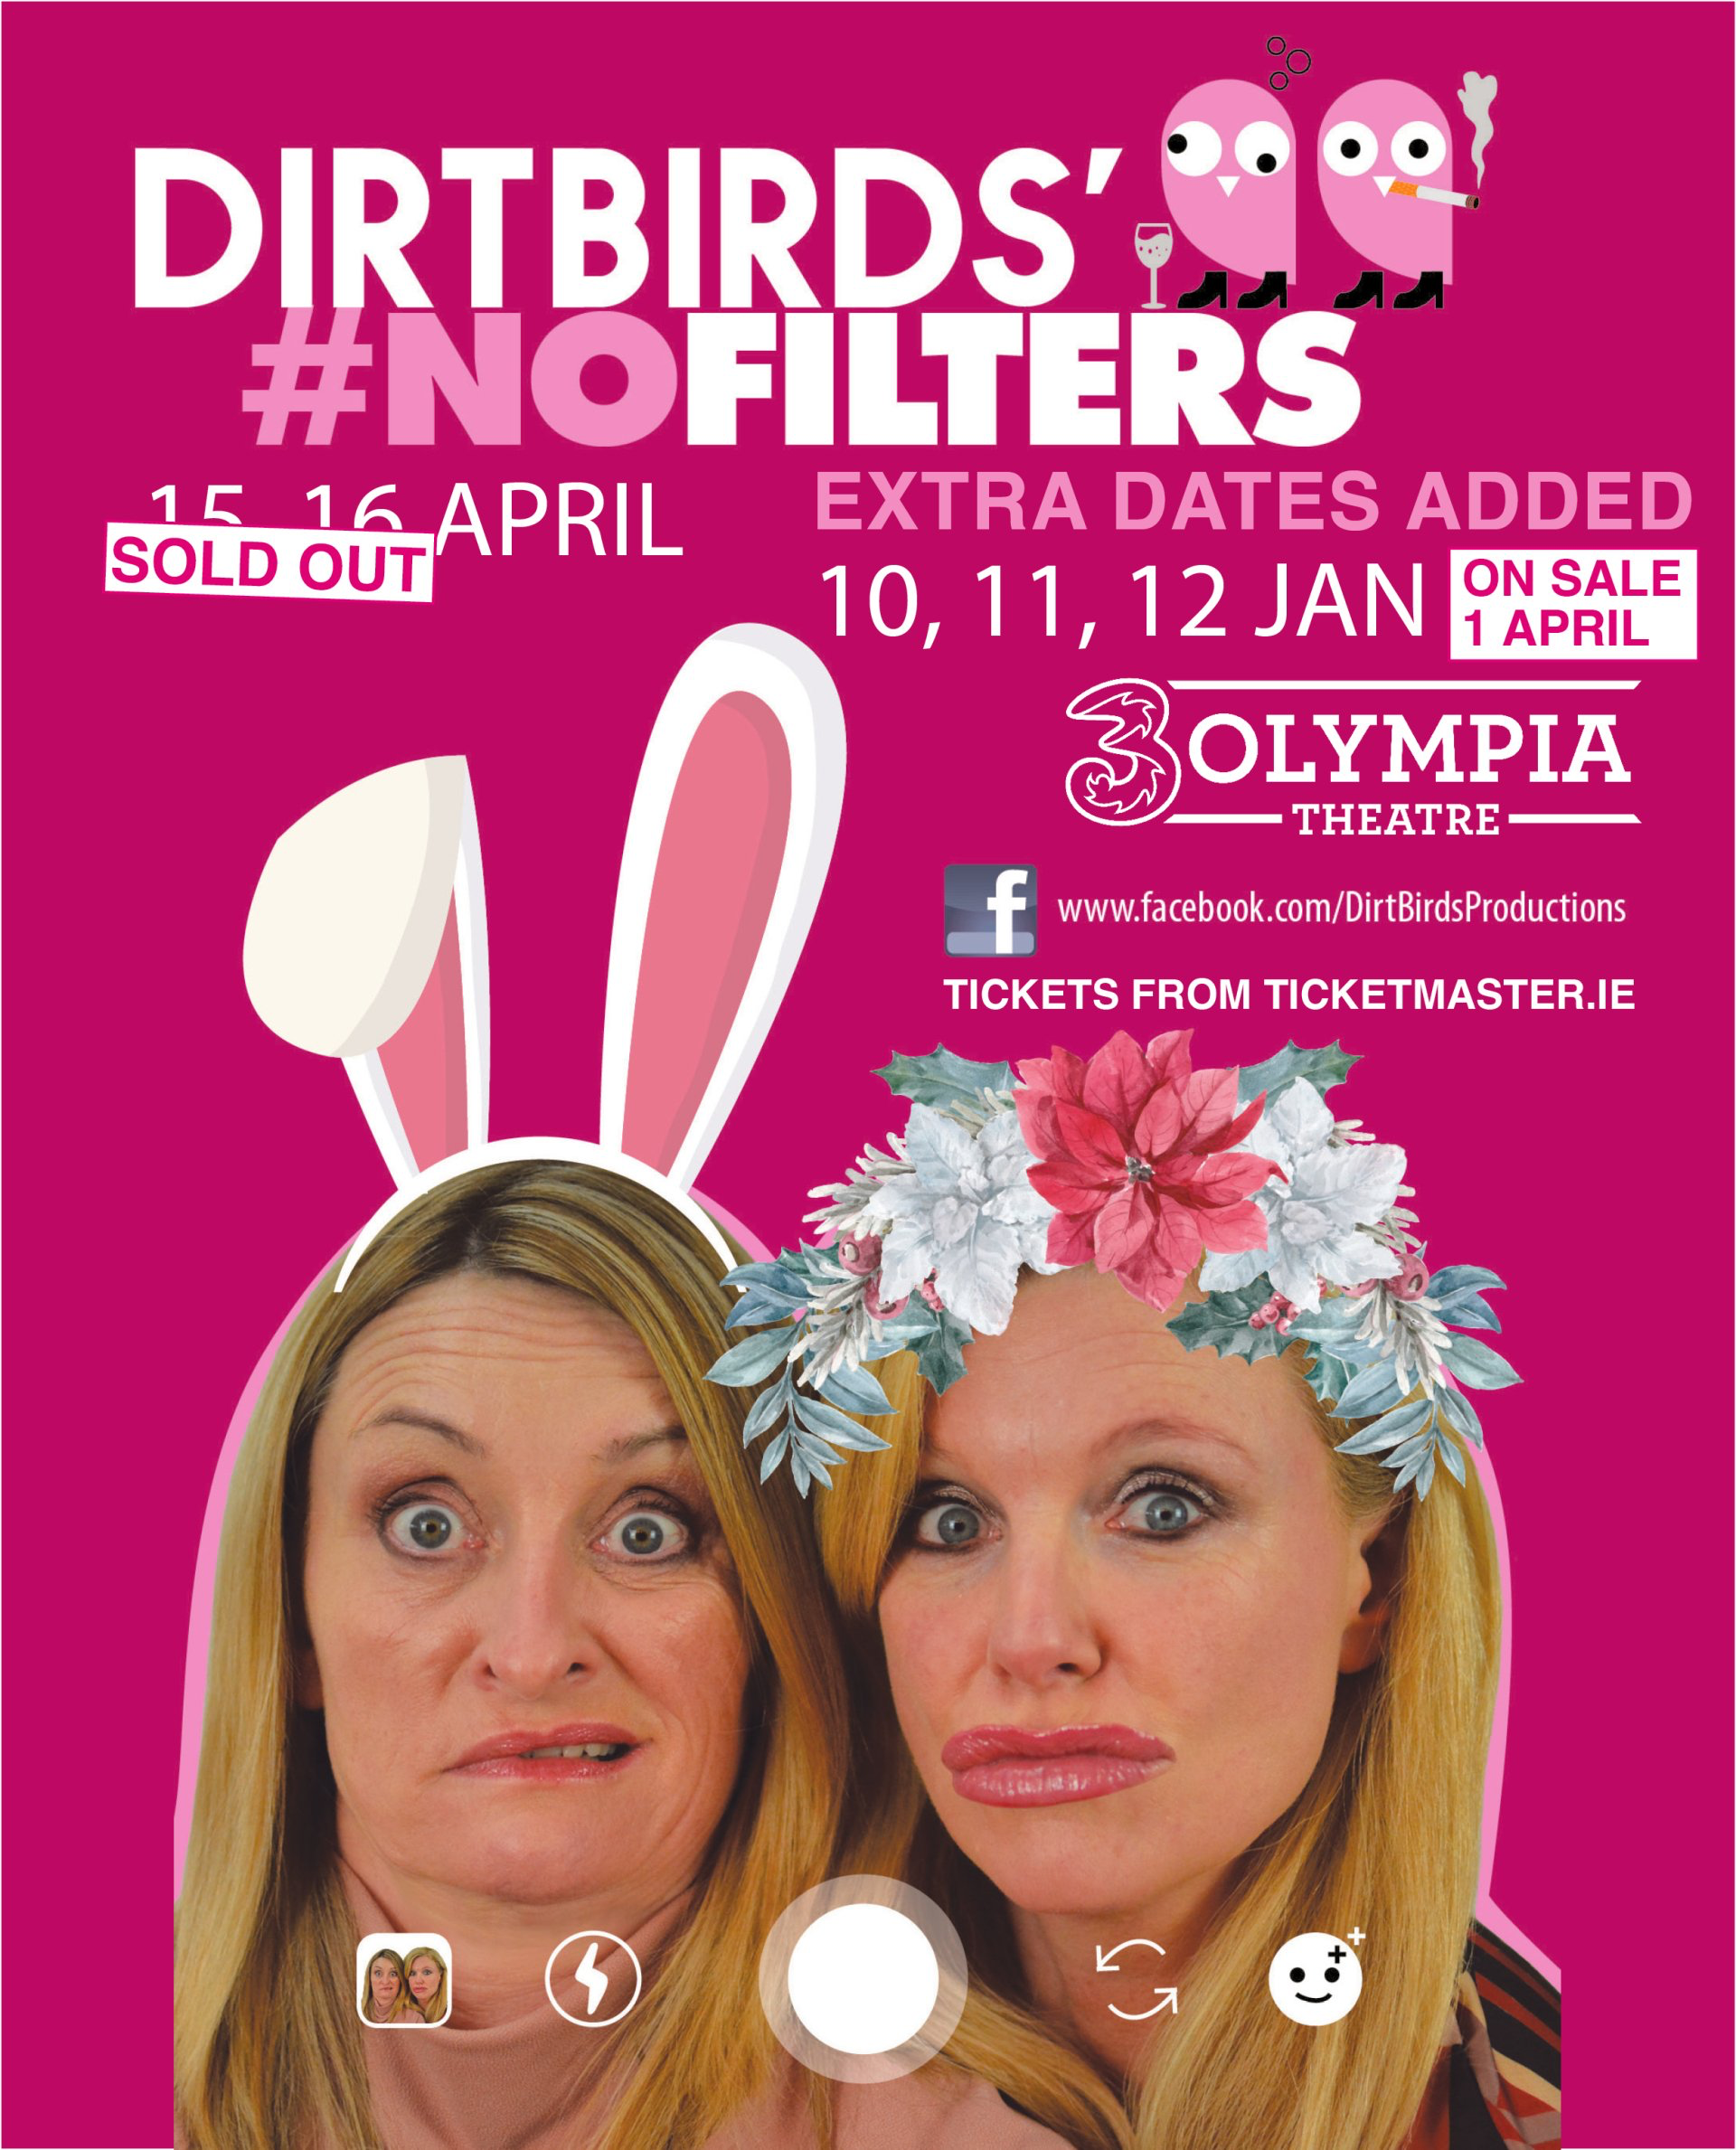 DIRT BIRDS   #NOFILTERS SHOW   EXTRA DATES AT 3OLYMPIA THEATRE  10, 11, 12 JANUARY